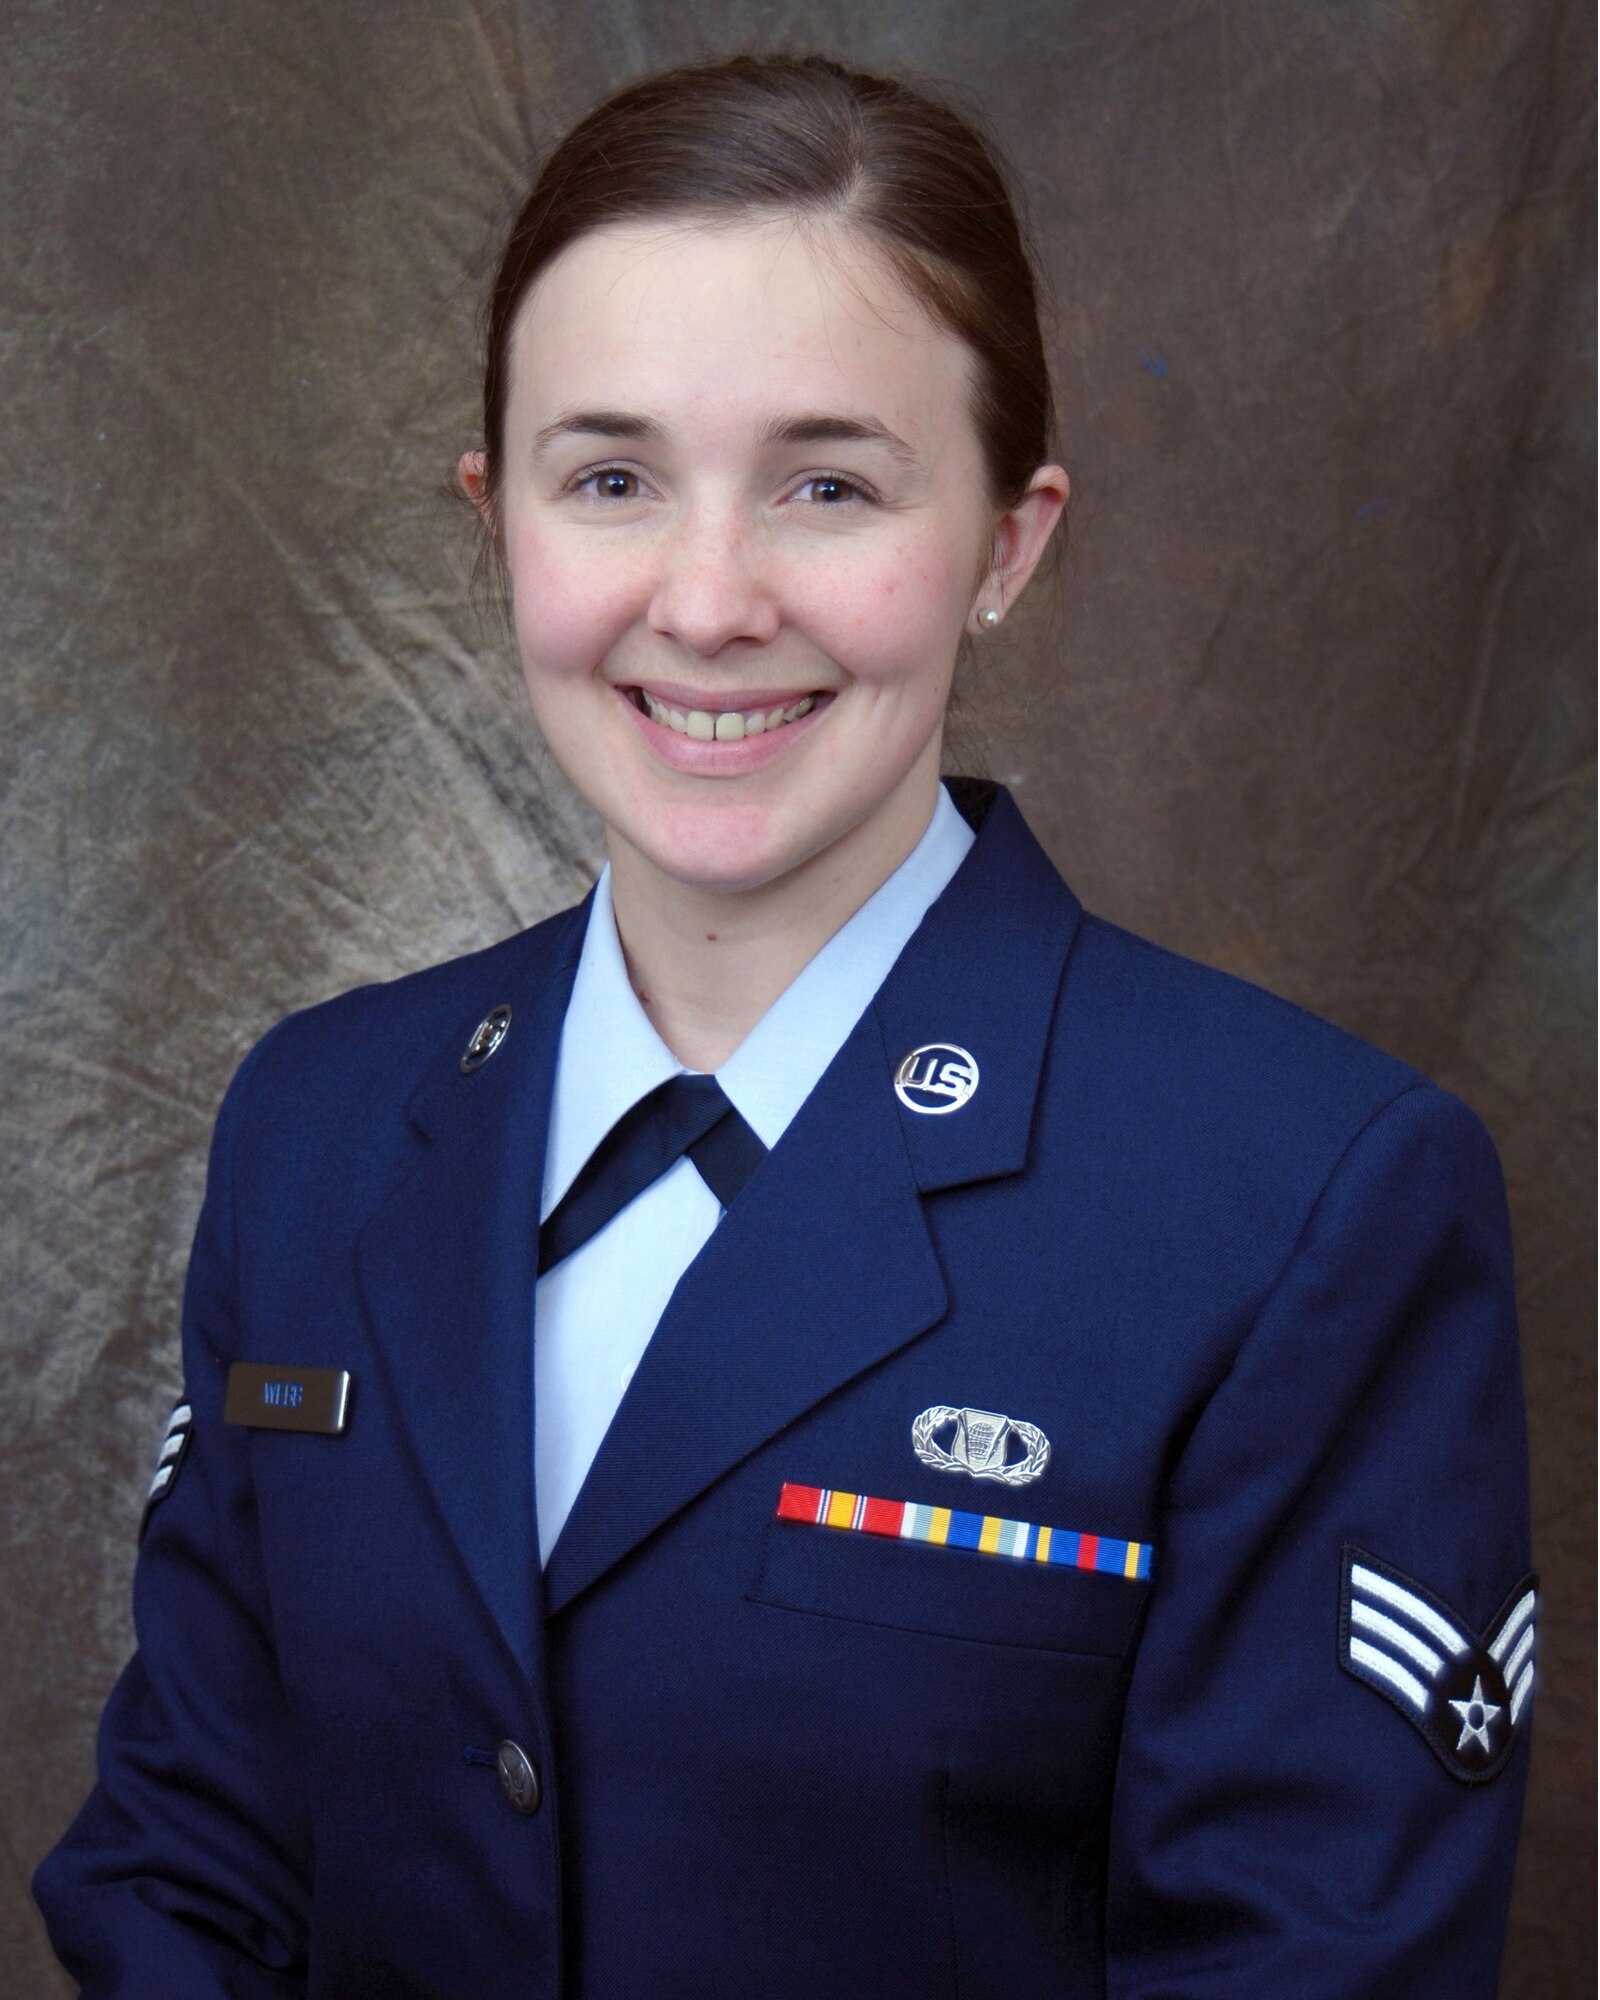 Senior Airman Webb, 118th Airlift Wing Command Post Controller, was selected as the Tennessee Airman of the Year for 2009.